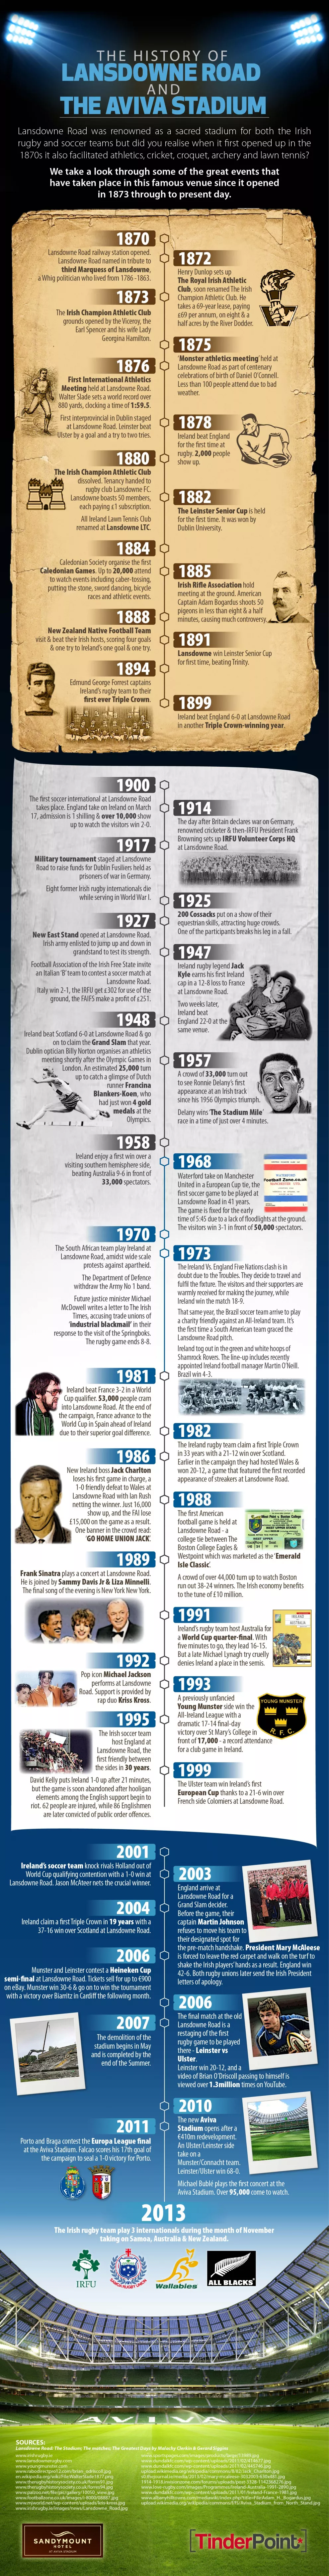 The-History-of-Lansdowne-Road-and-The-Aviva-Stadium-Infographic1